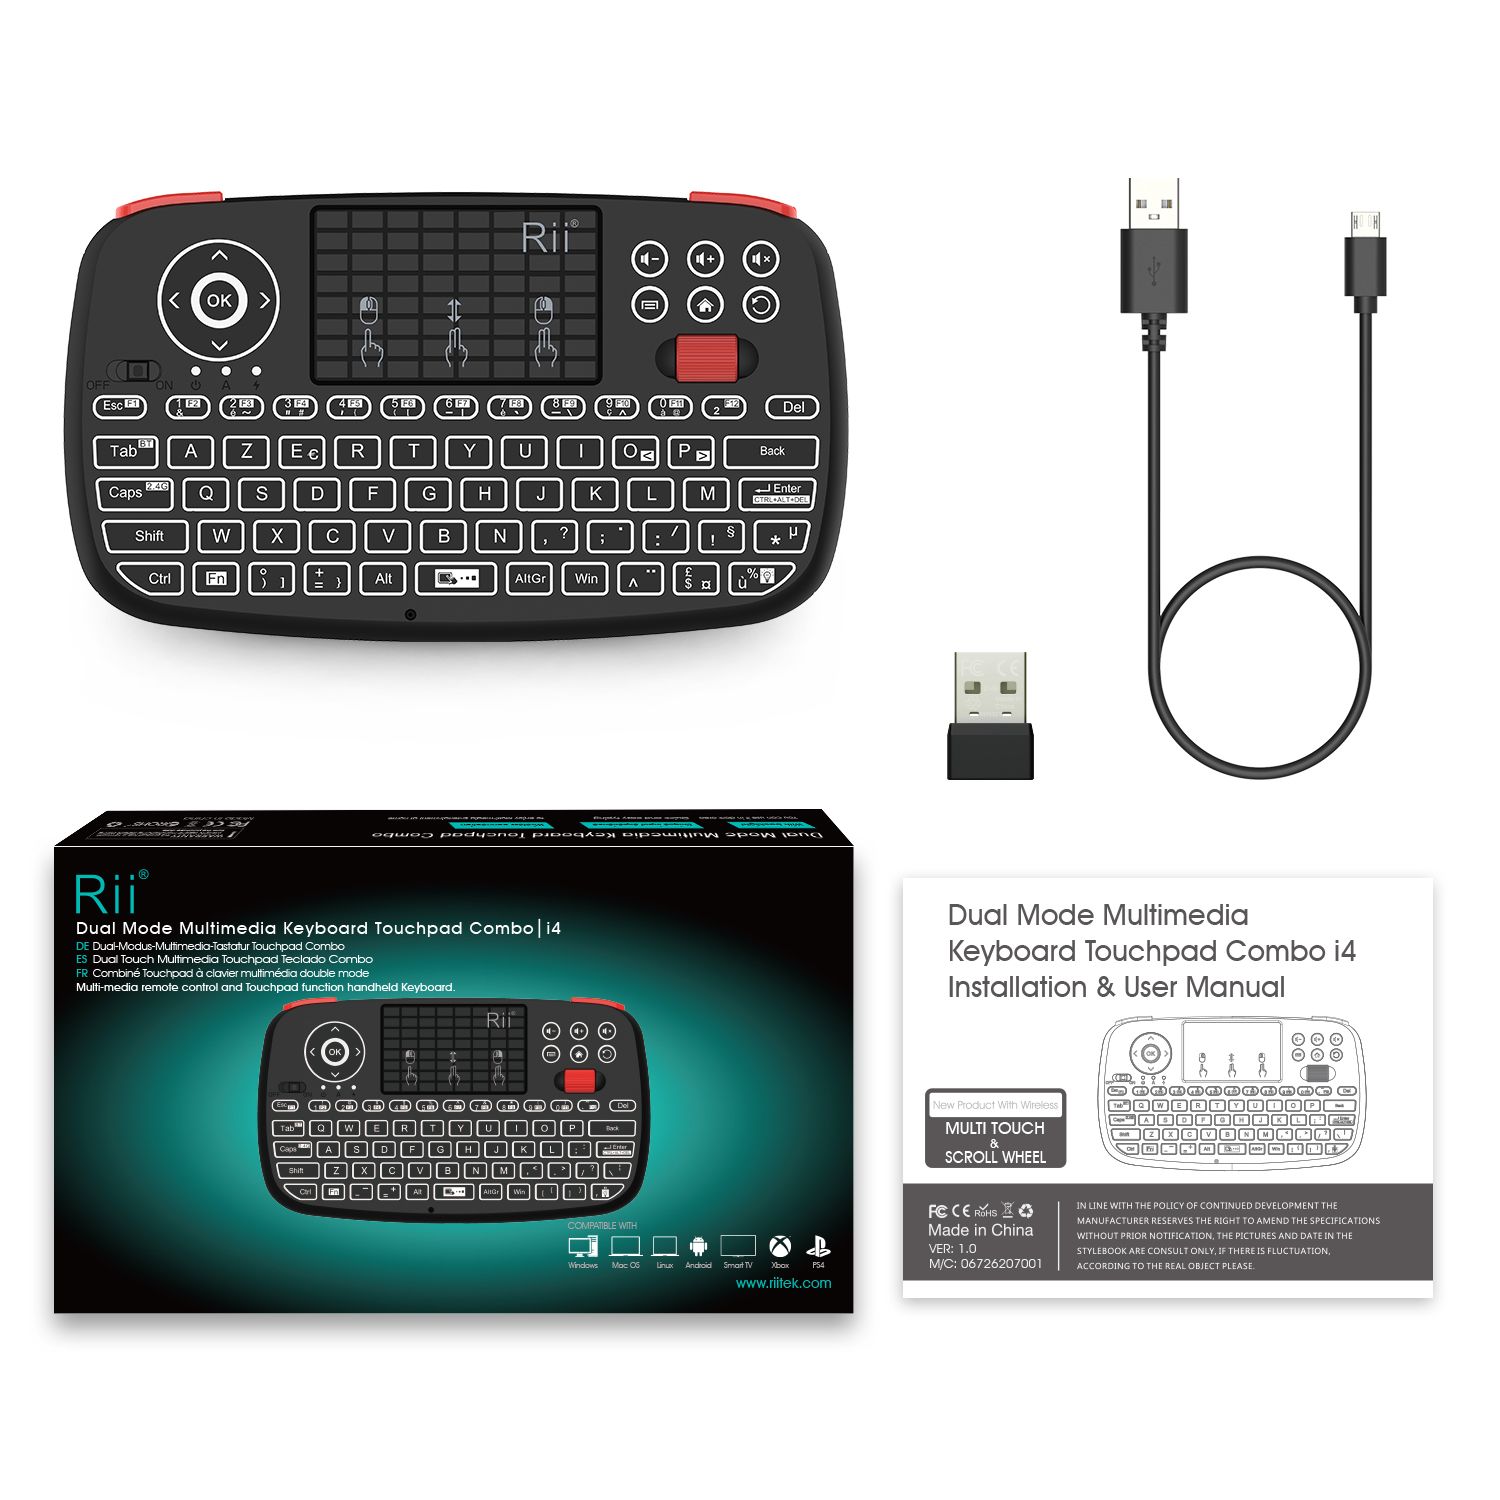 Rii-i4-French-Mini-Keyboard-24GHz-Bluetooth-Dual-Modes-Handheld-Fingerboard-Backlit-Mouse-Touchpad-f-1761126